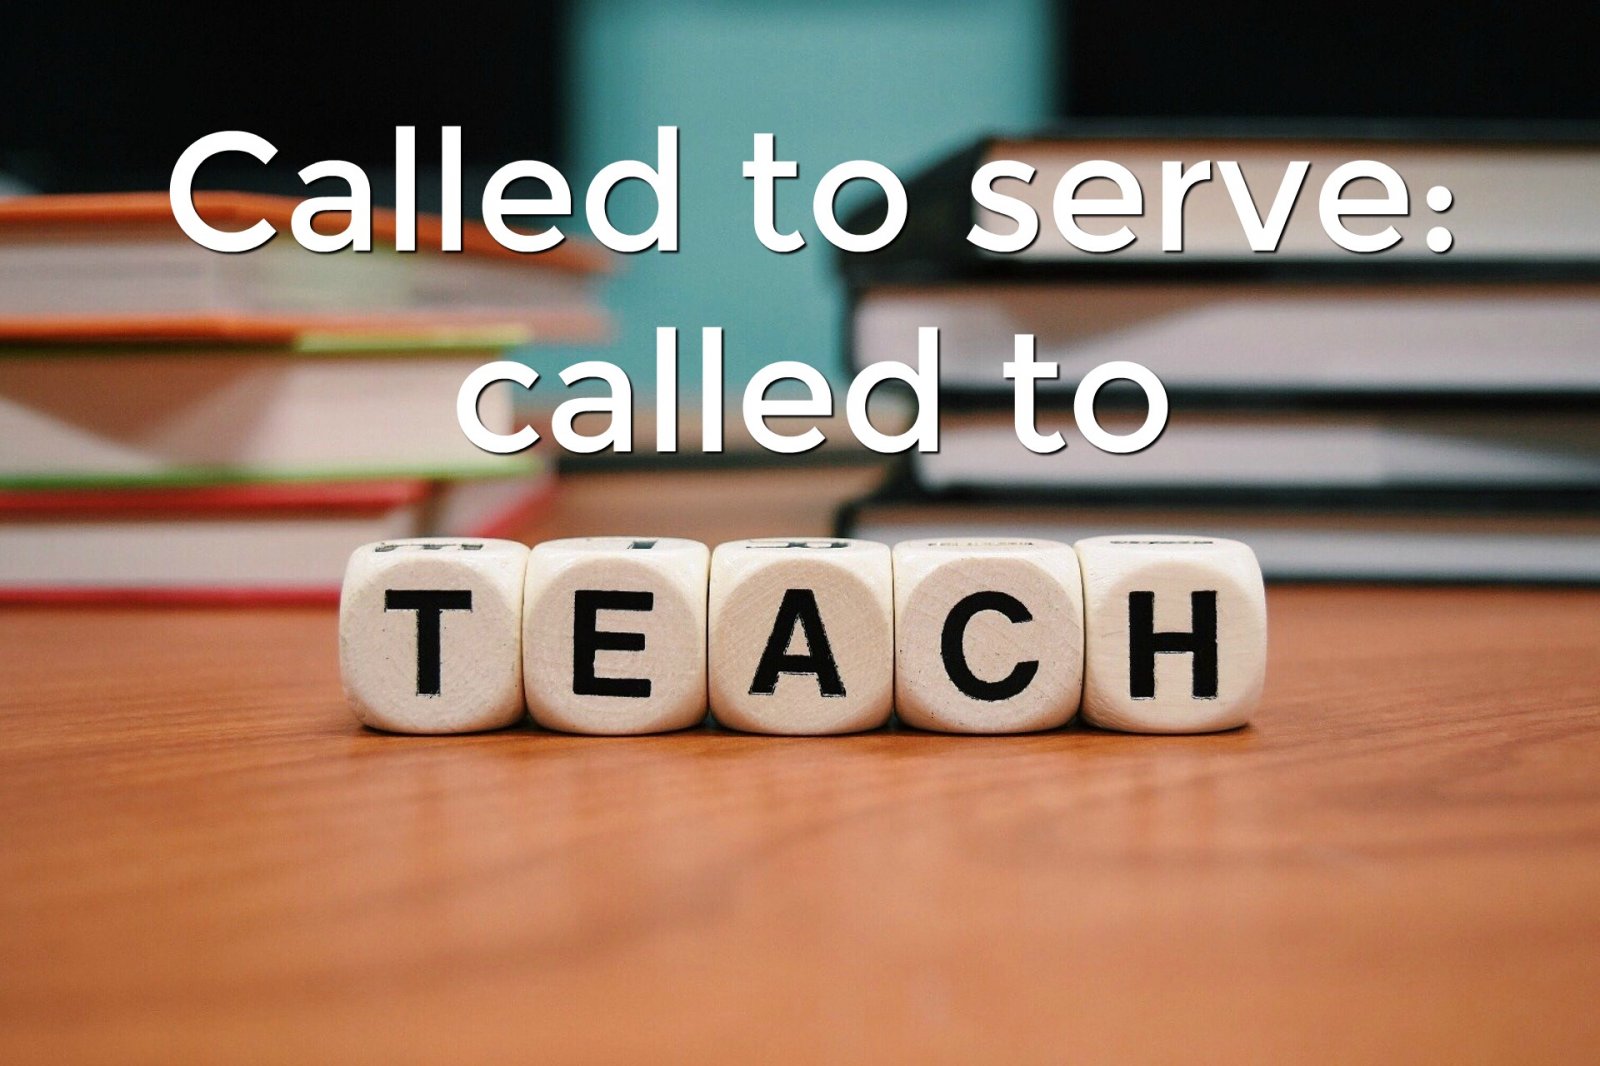 Called to serve: called to teach